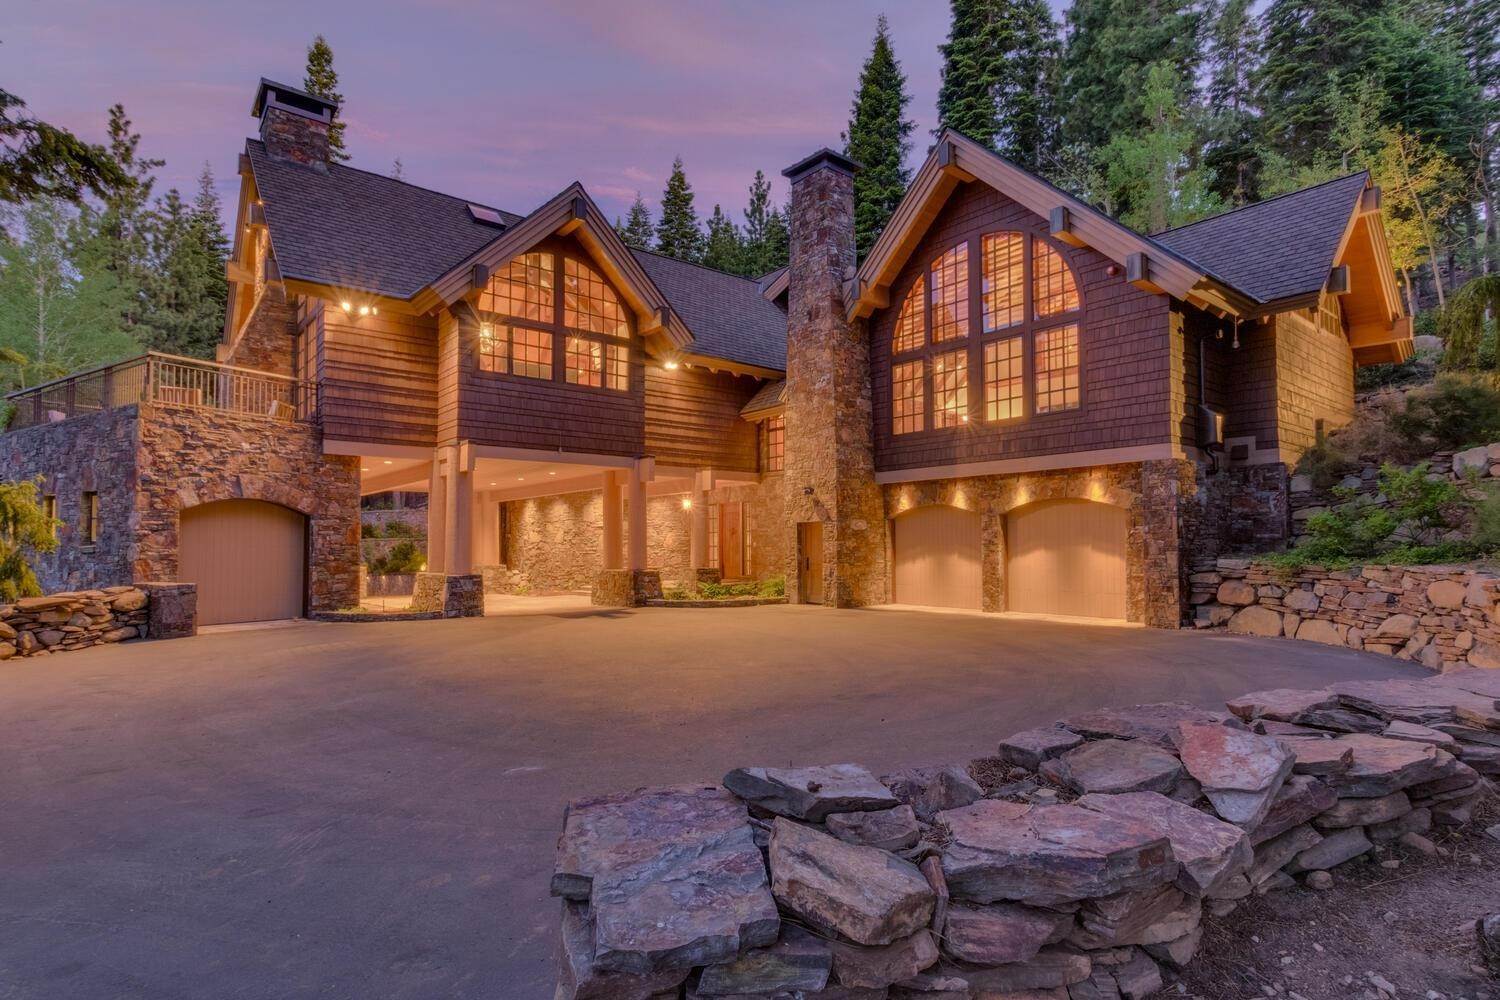 Single Family Homes for Active at 2222 Silver Fox Court Truckee, California 96161 United States